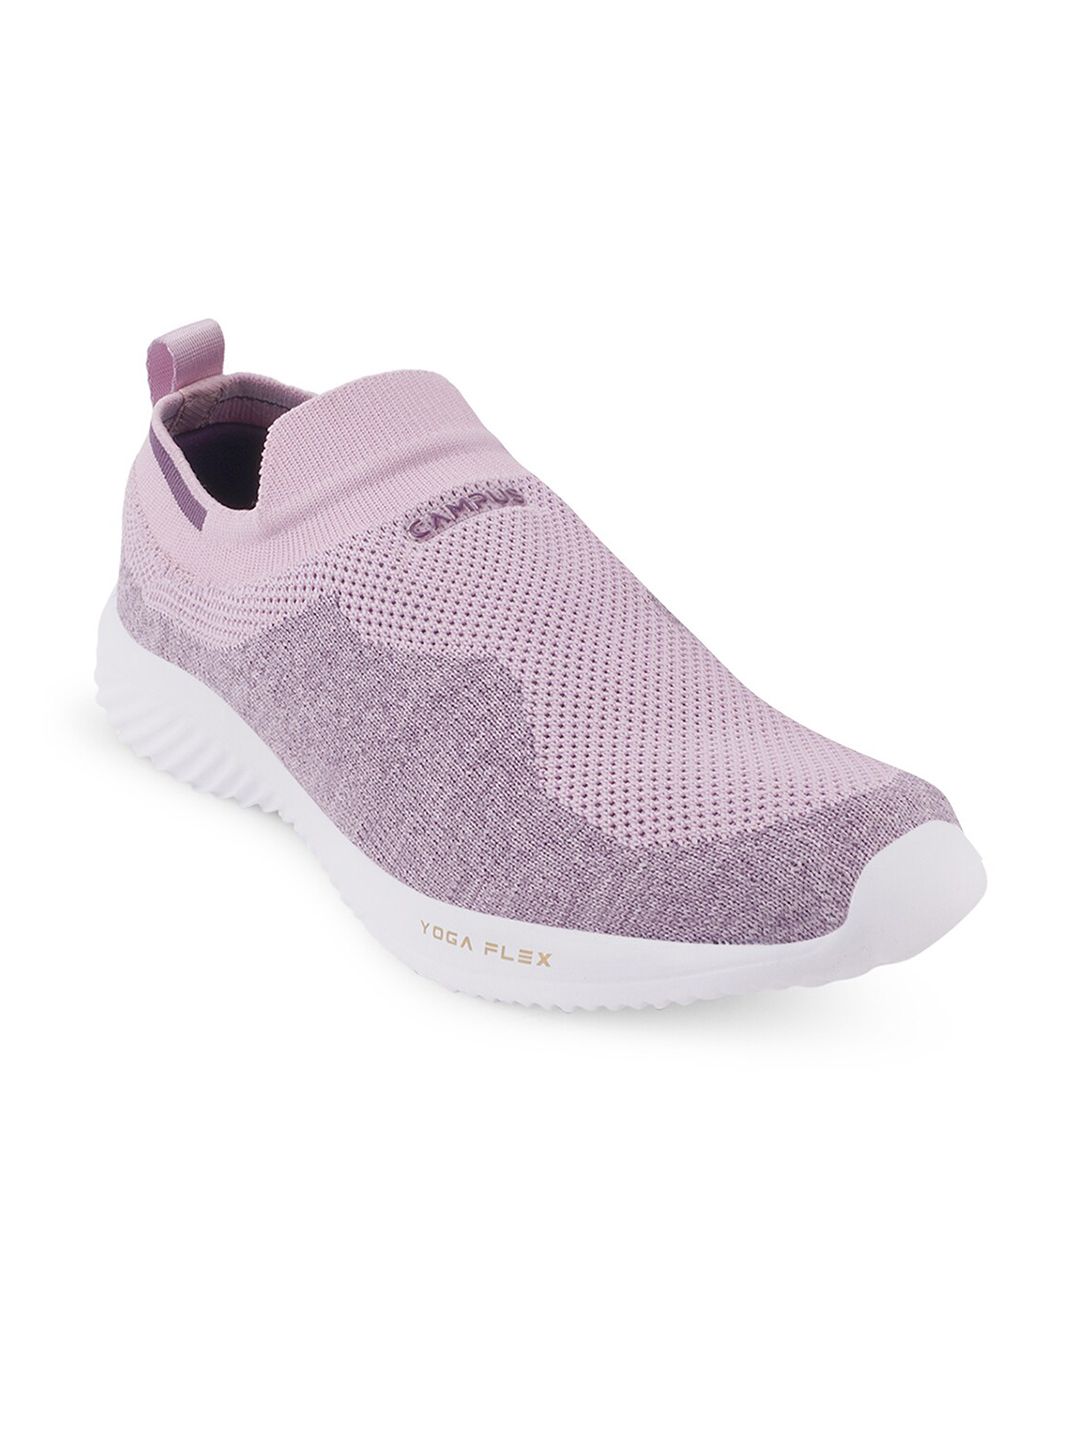 Campus Women Mesh Slip On Running Sports Shoes Price in India